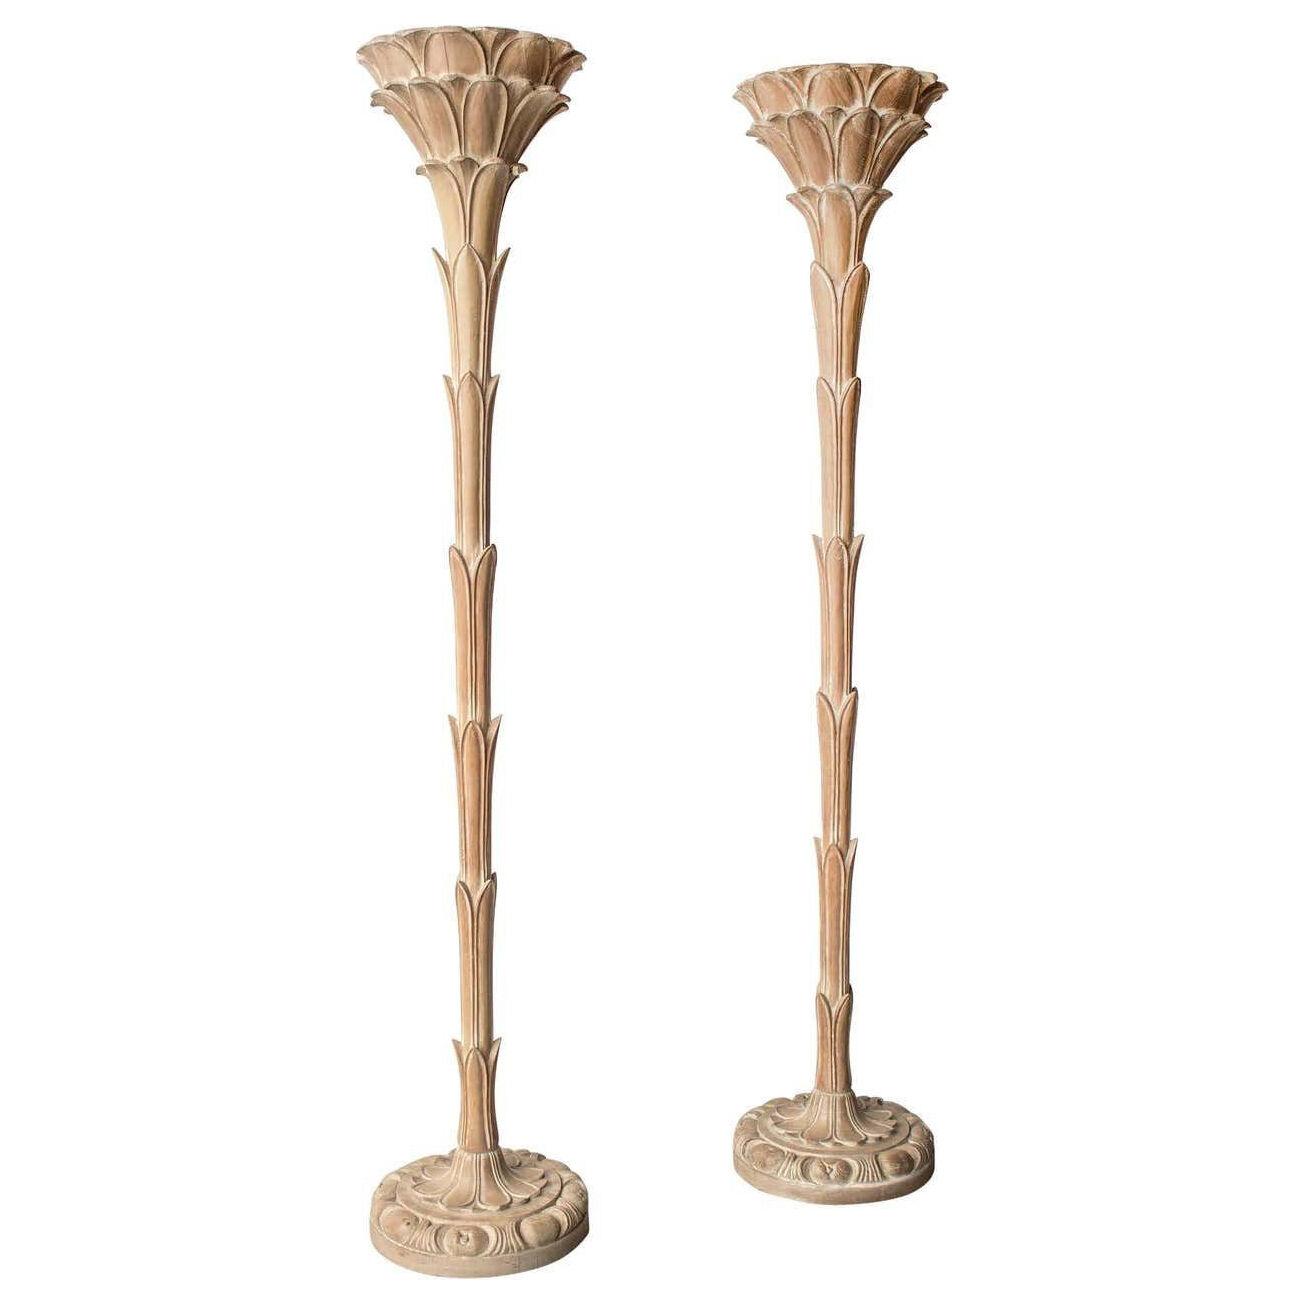 Torchiere Floor Lamps after Serge Roche Hand Carved Limed Oak Palm Trees, 1940s